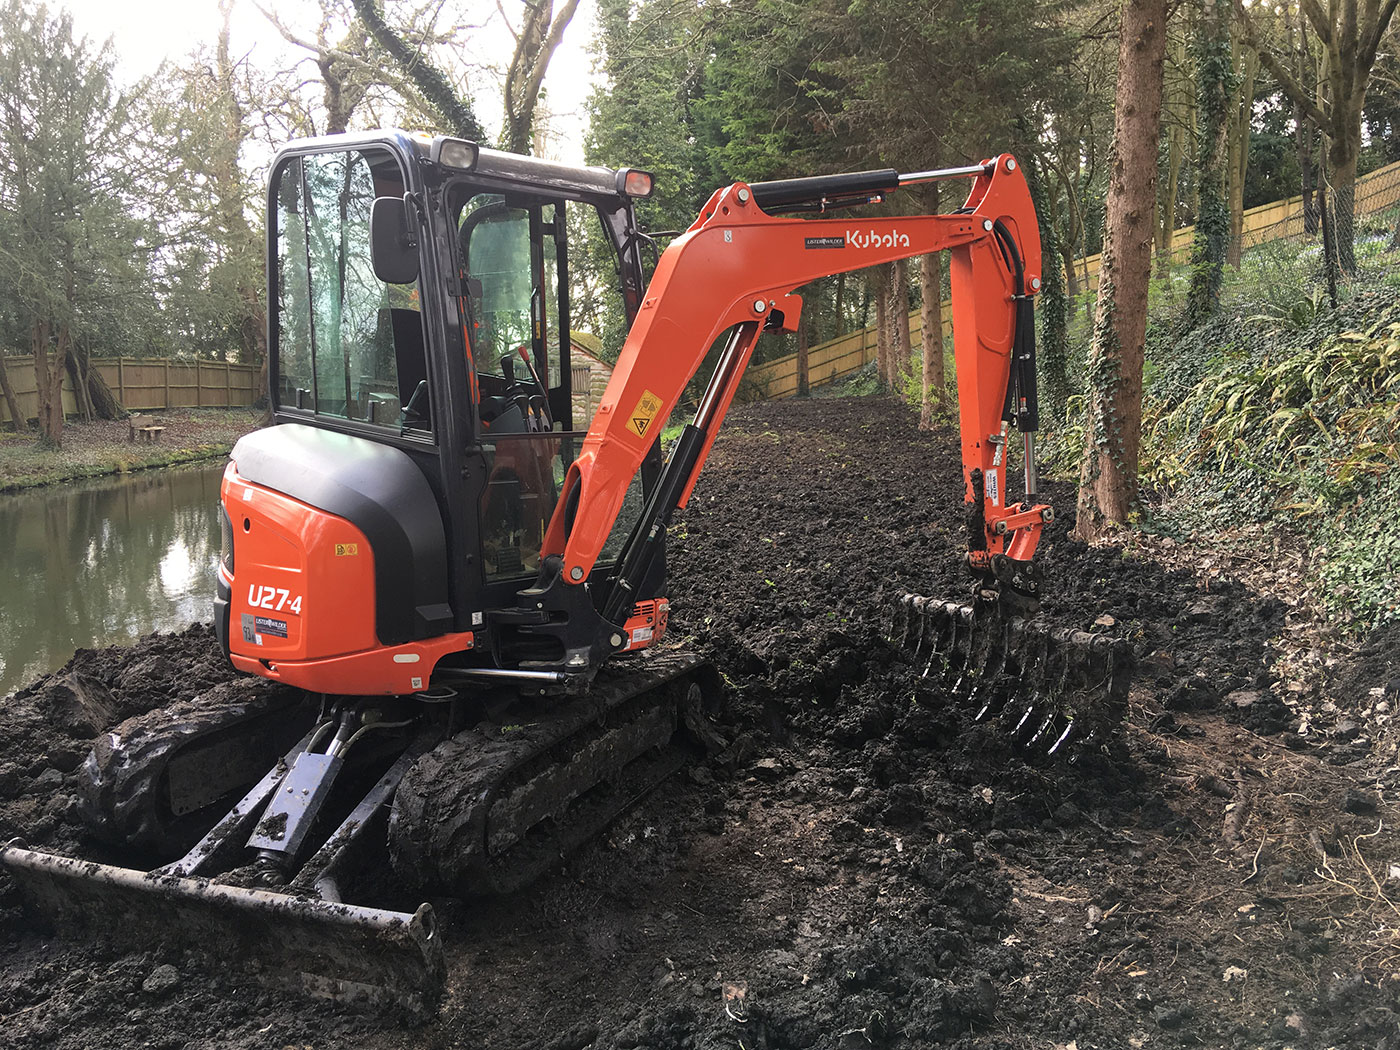 Kubota digger in use by Vincent Fencing